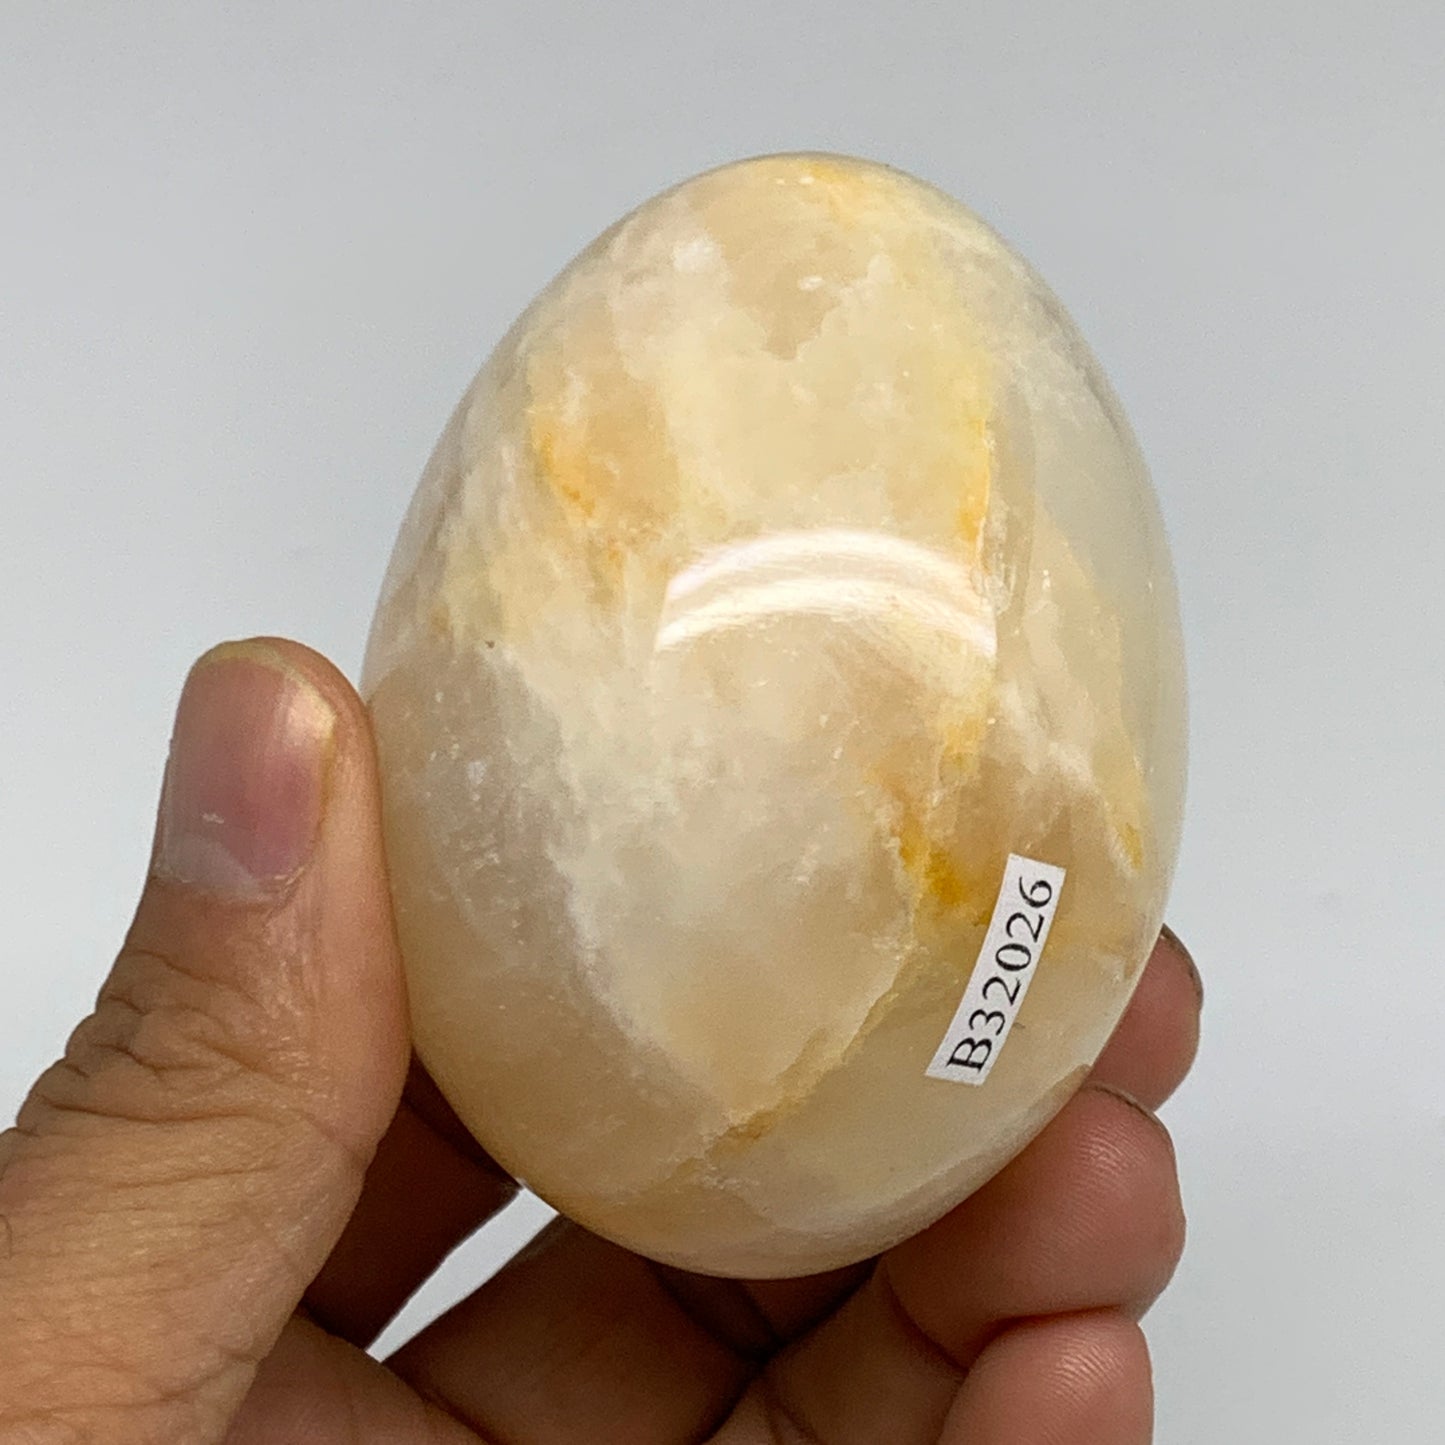 254g, 2.7"x2" Natural Green Onyx Egg Gemstone Mineral, from Pakistan, B32026